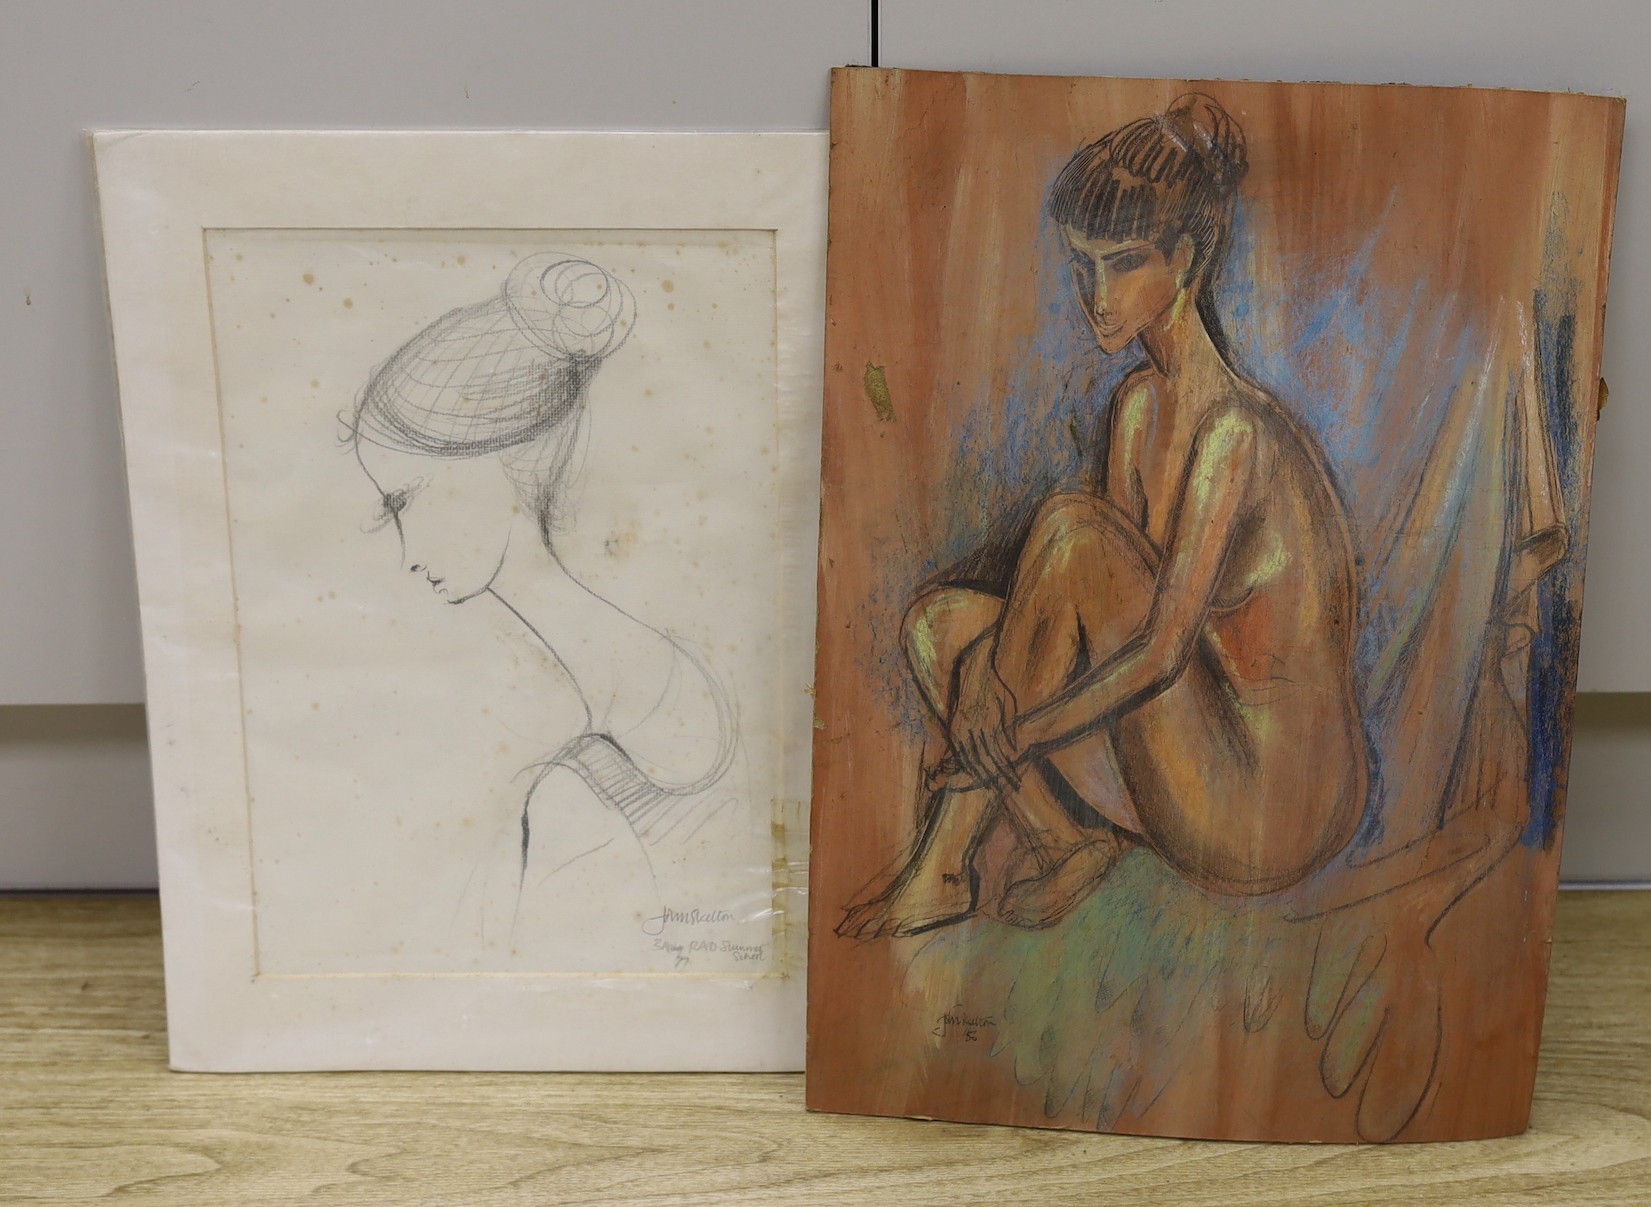 John Skelton (1923-2009) - Sketch of a seated nude, pastel and charcoal on board, signed, dated ‘56, unframed, 50 x 35cms. and head and shoulders study, charcoal on paper, signed and dated 3rd Aug. ‘77, inscribed “‘RAD S